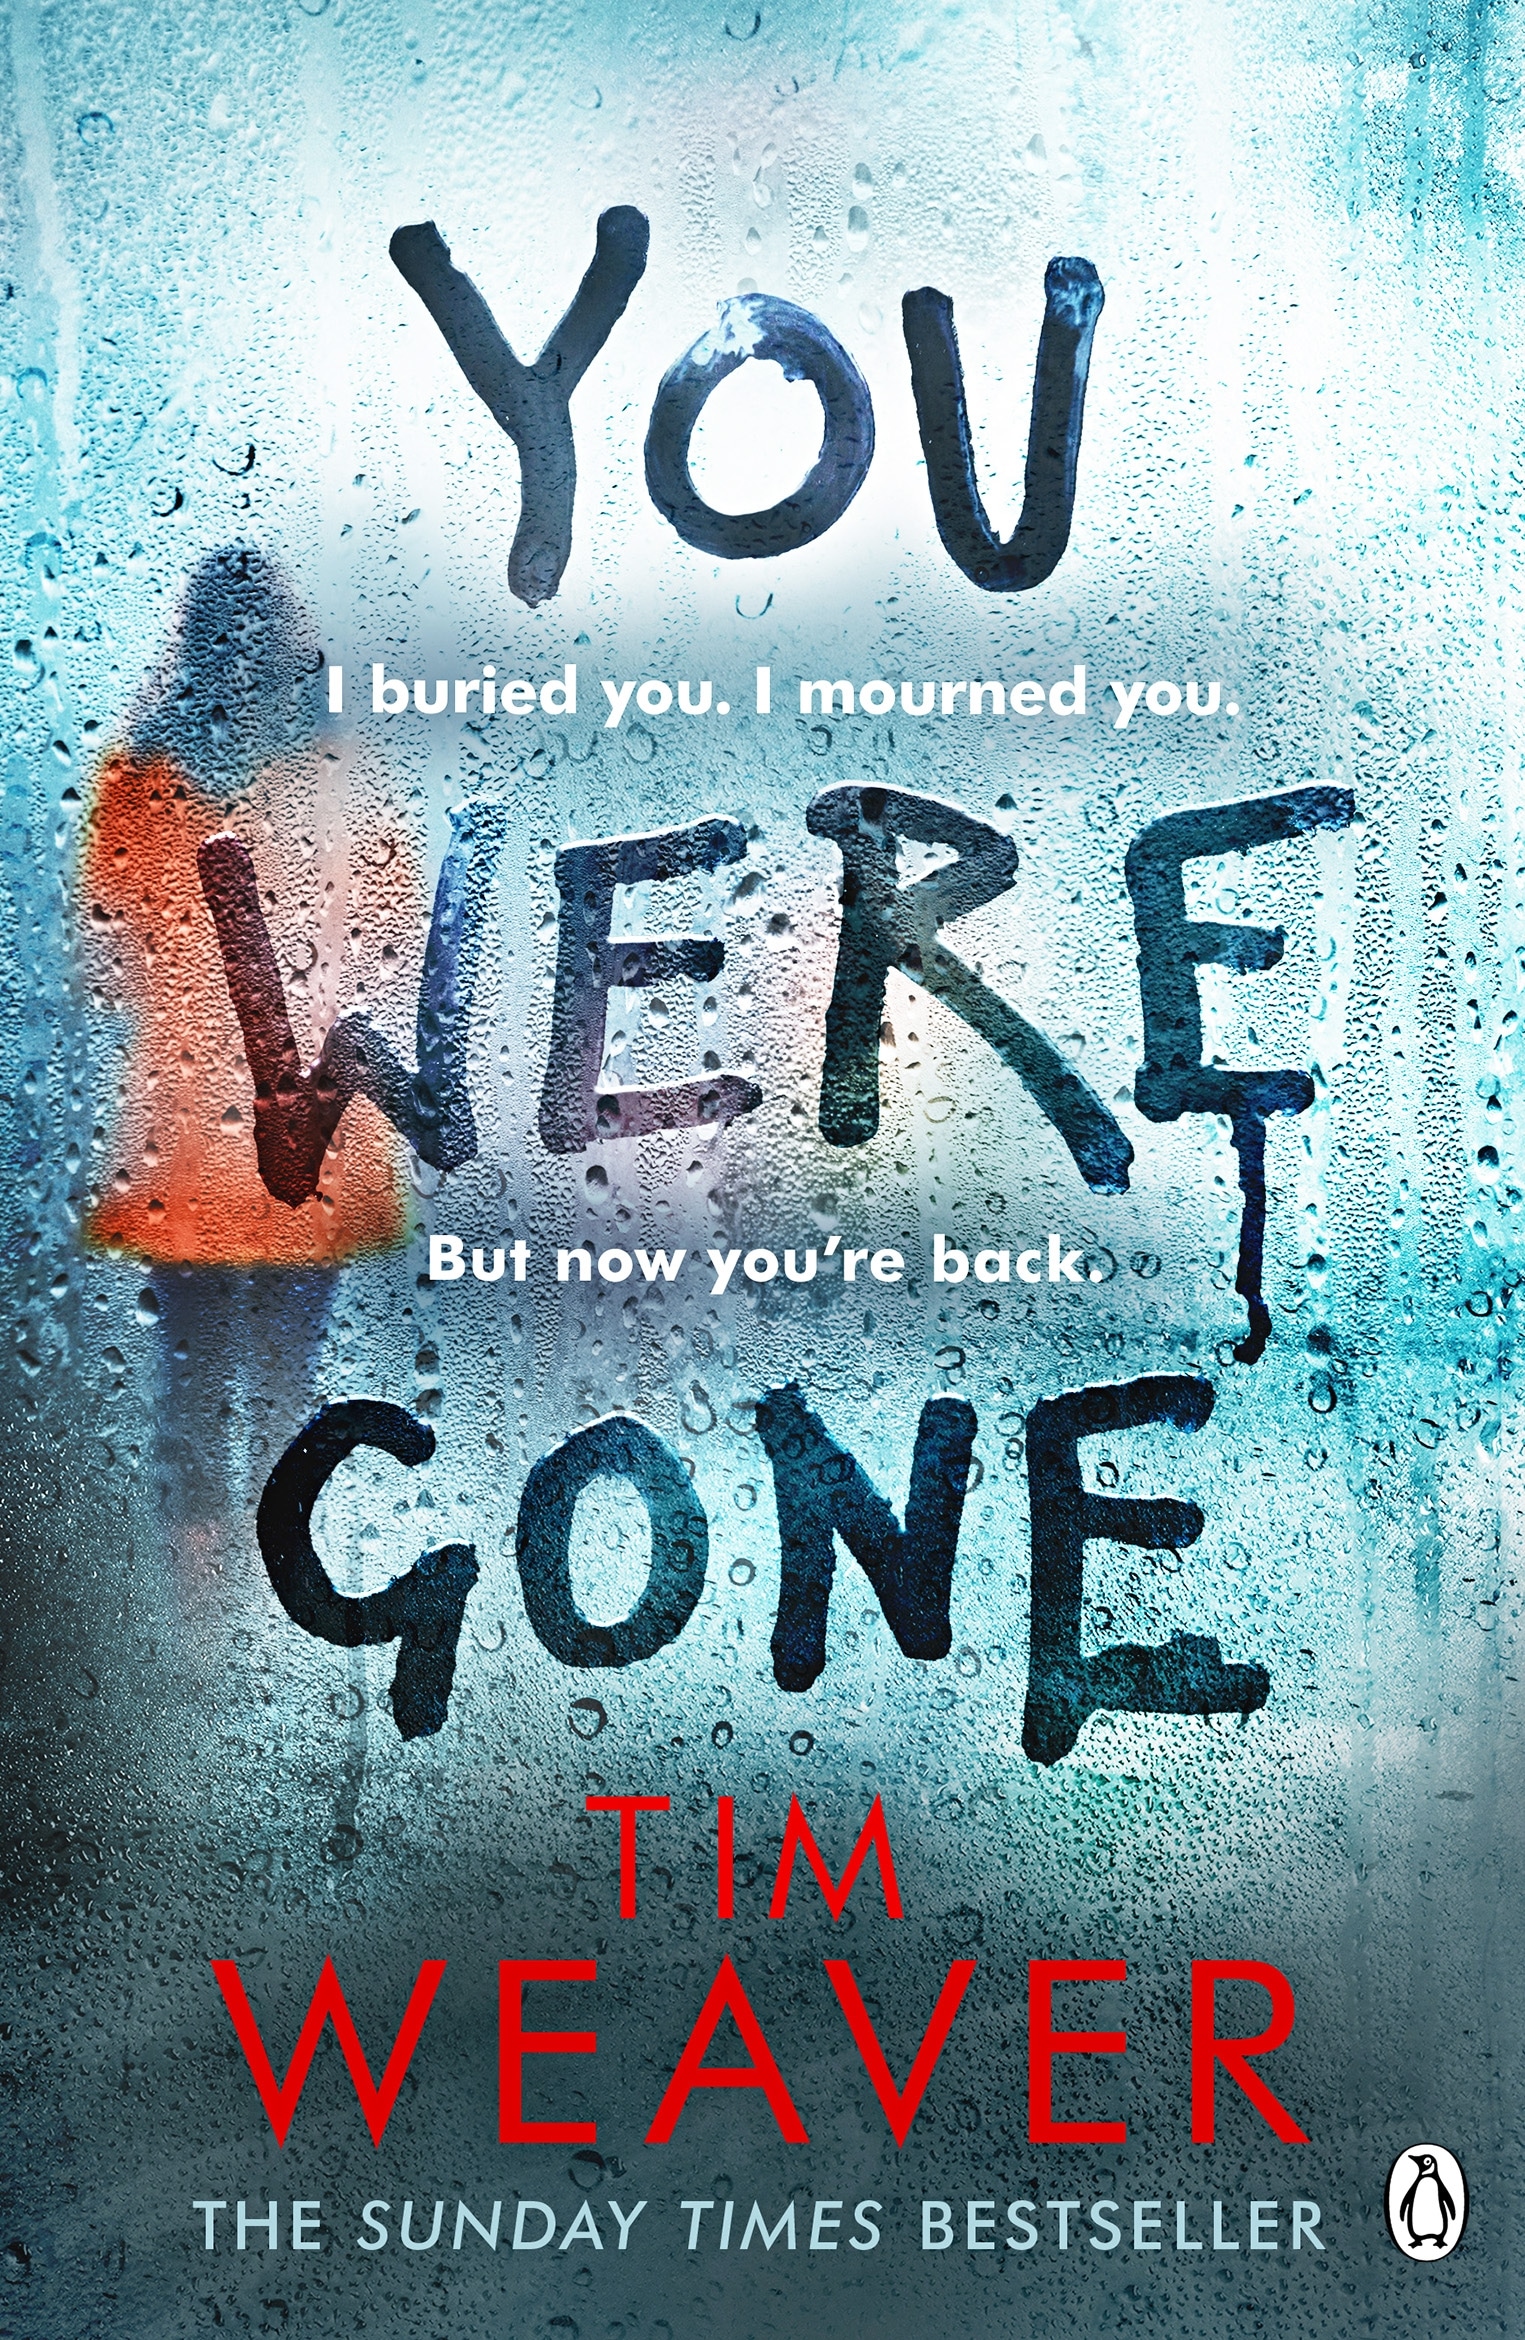 Book “You Were Gone” by Tim Weaver — February 21, 2019